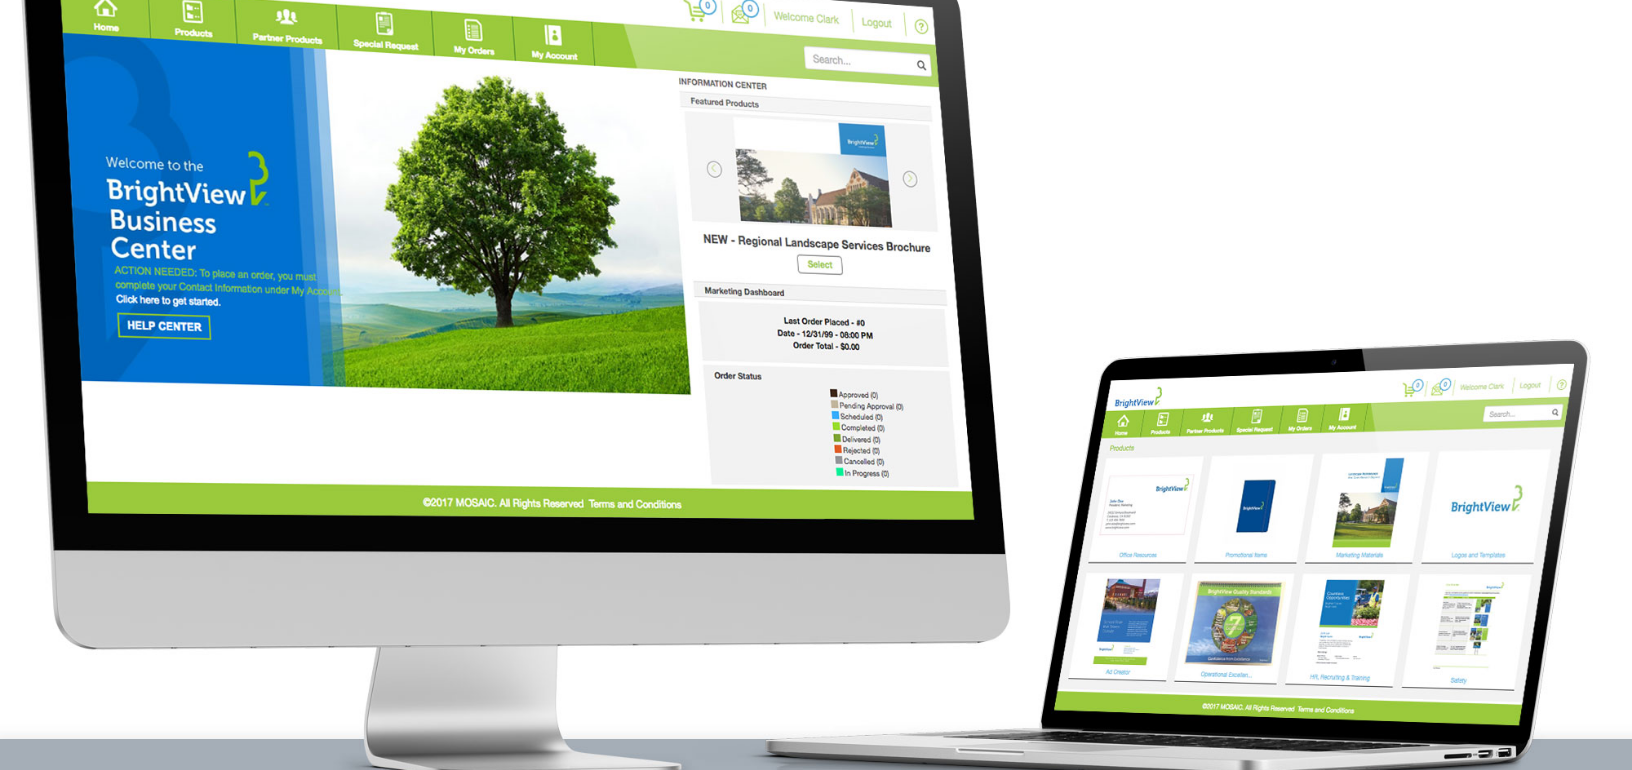 A desktop computer and a laptop side by side displaying a website for BrightView Business Center with a green-themed interface and images of nature, symbolizing a professional corporate storefront web presence.